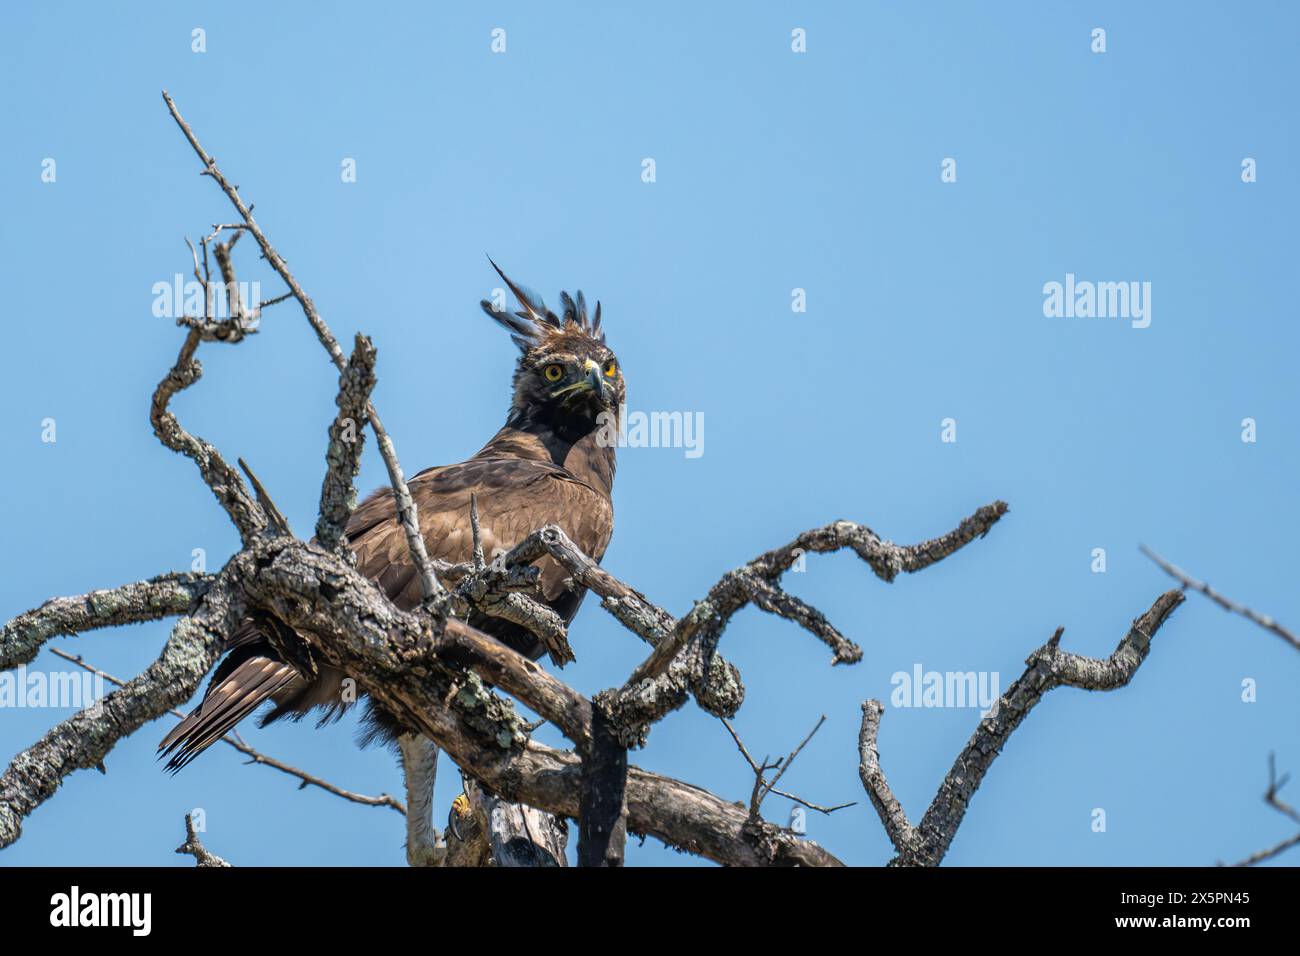 Crested Eagle perched on the dead branches of a tall tree Stock Photo